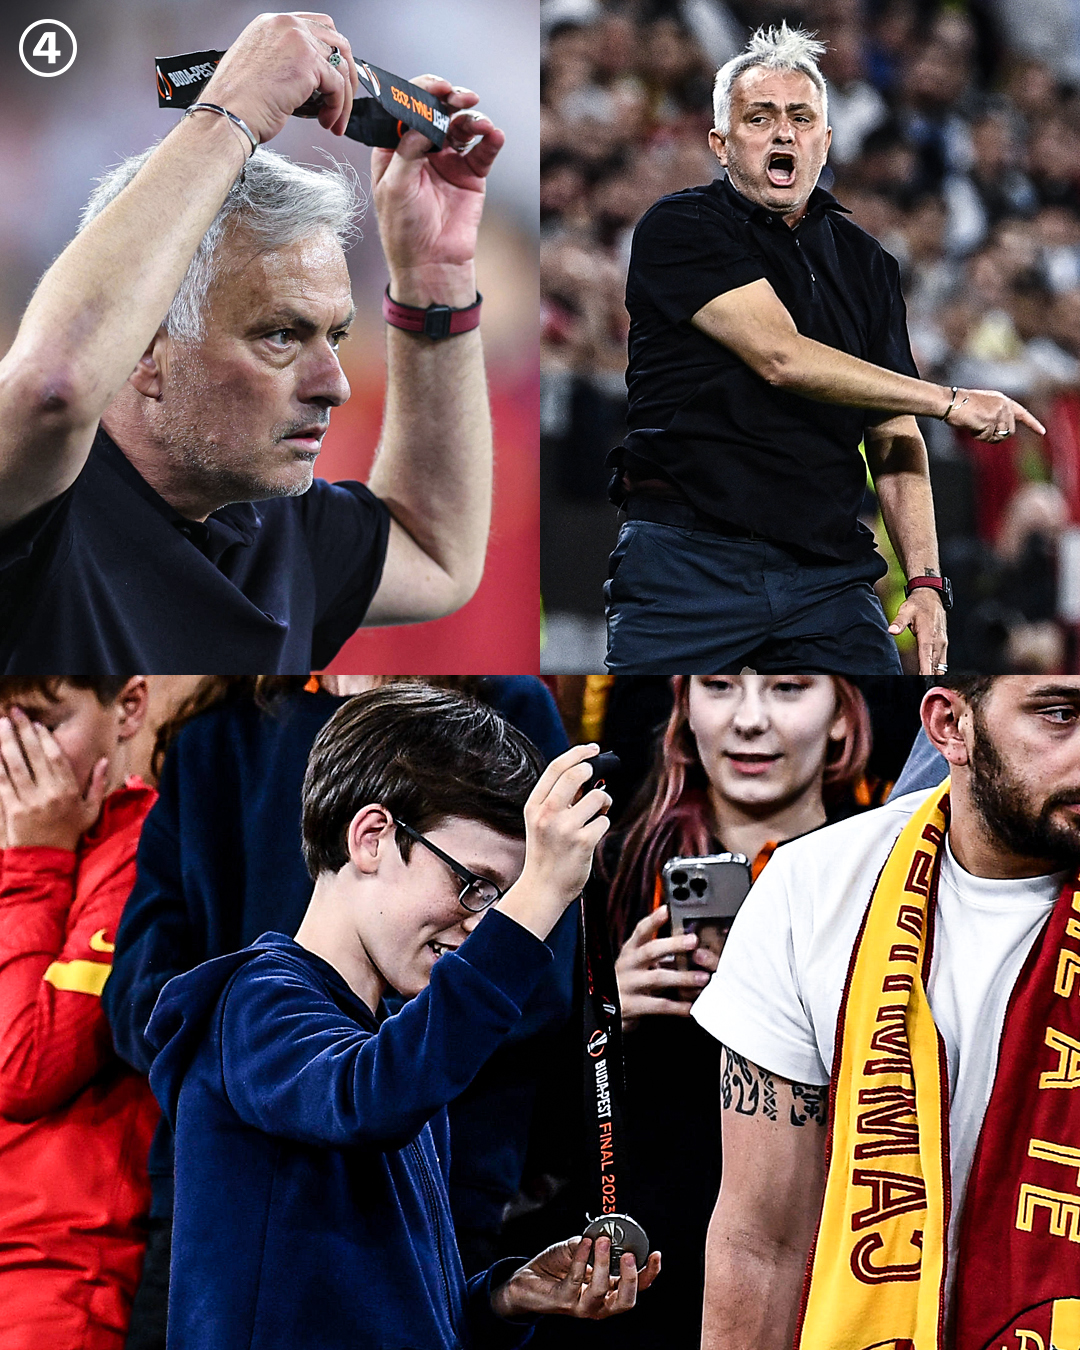 433 on Twitter: "José Mourinho threw his runners-up medal into the crowd 🥈 https://t.co/16yXtbvrAO" / Twitter